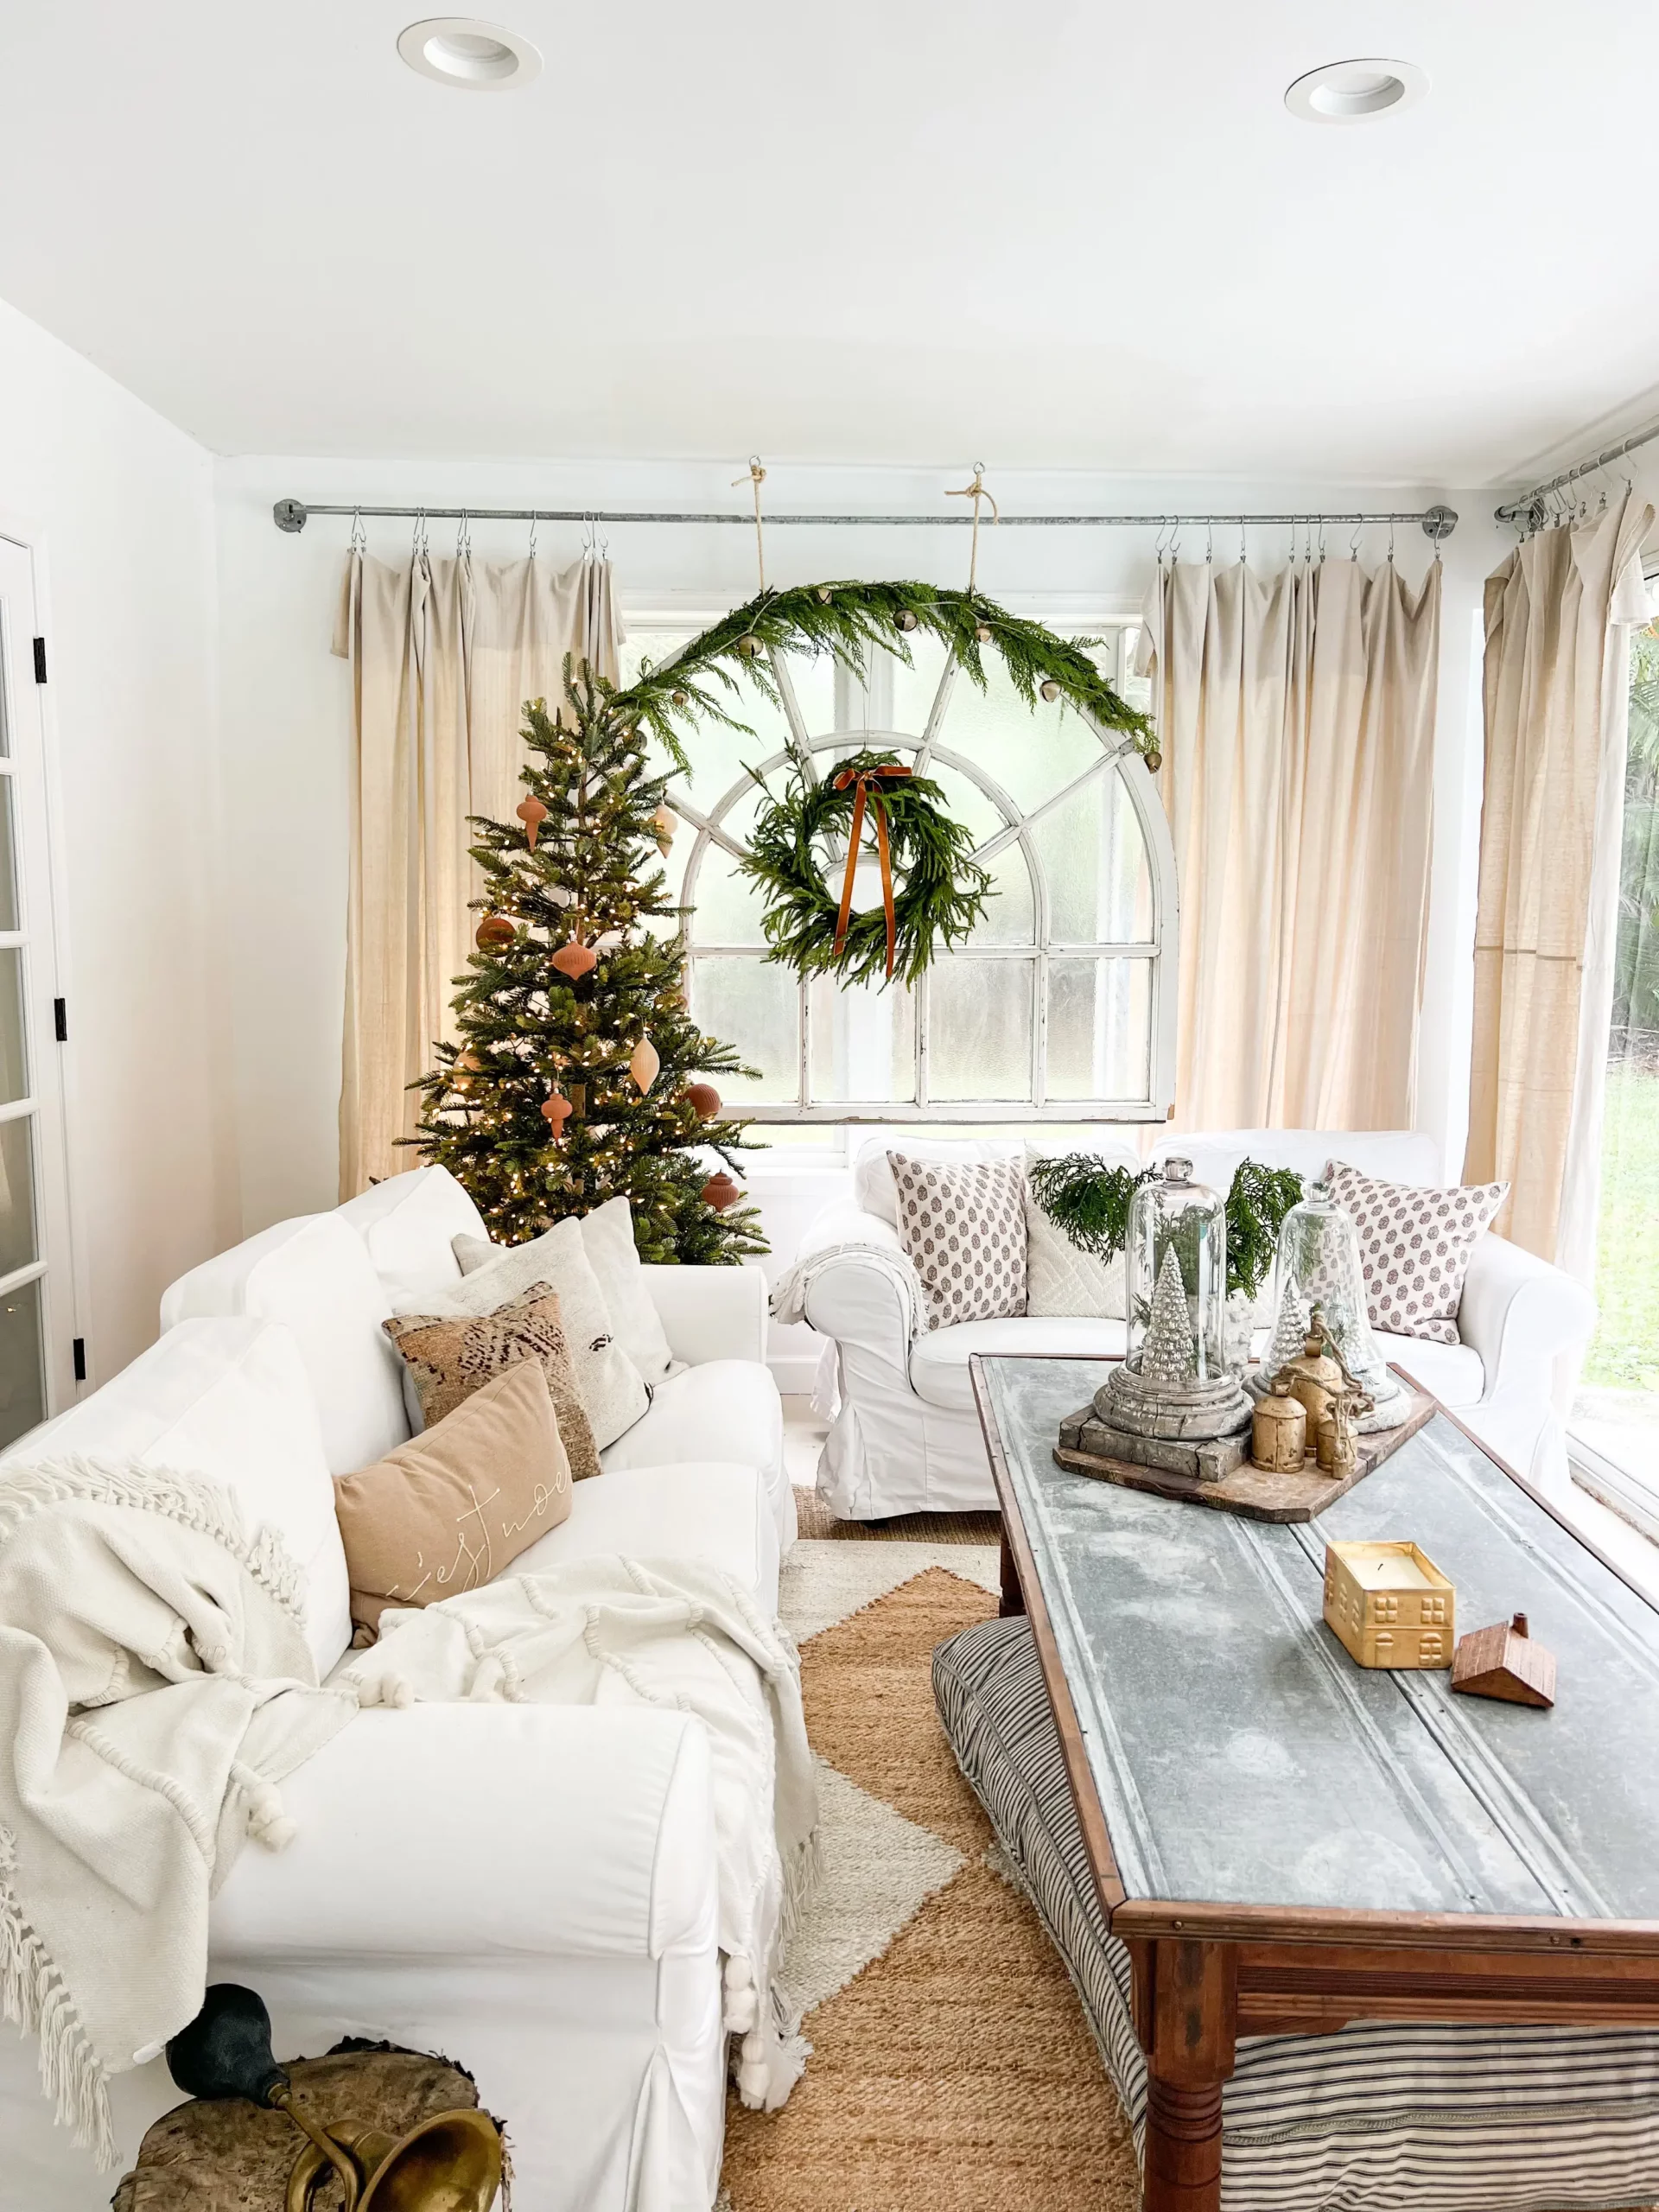 back living room with Christmas decor with a Christmas tree, a large window with Christmas greenery and other Christmas decor